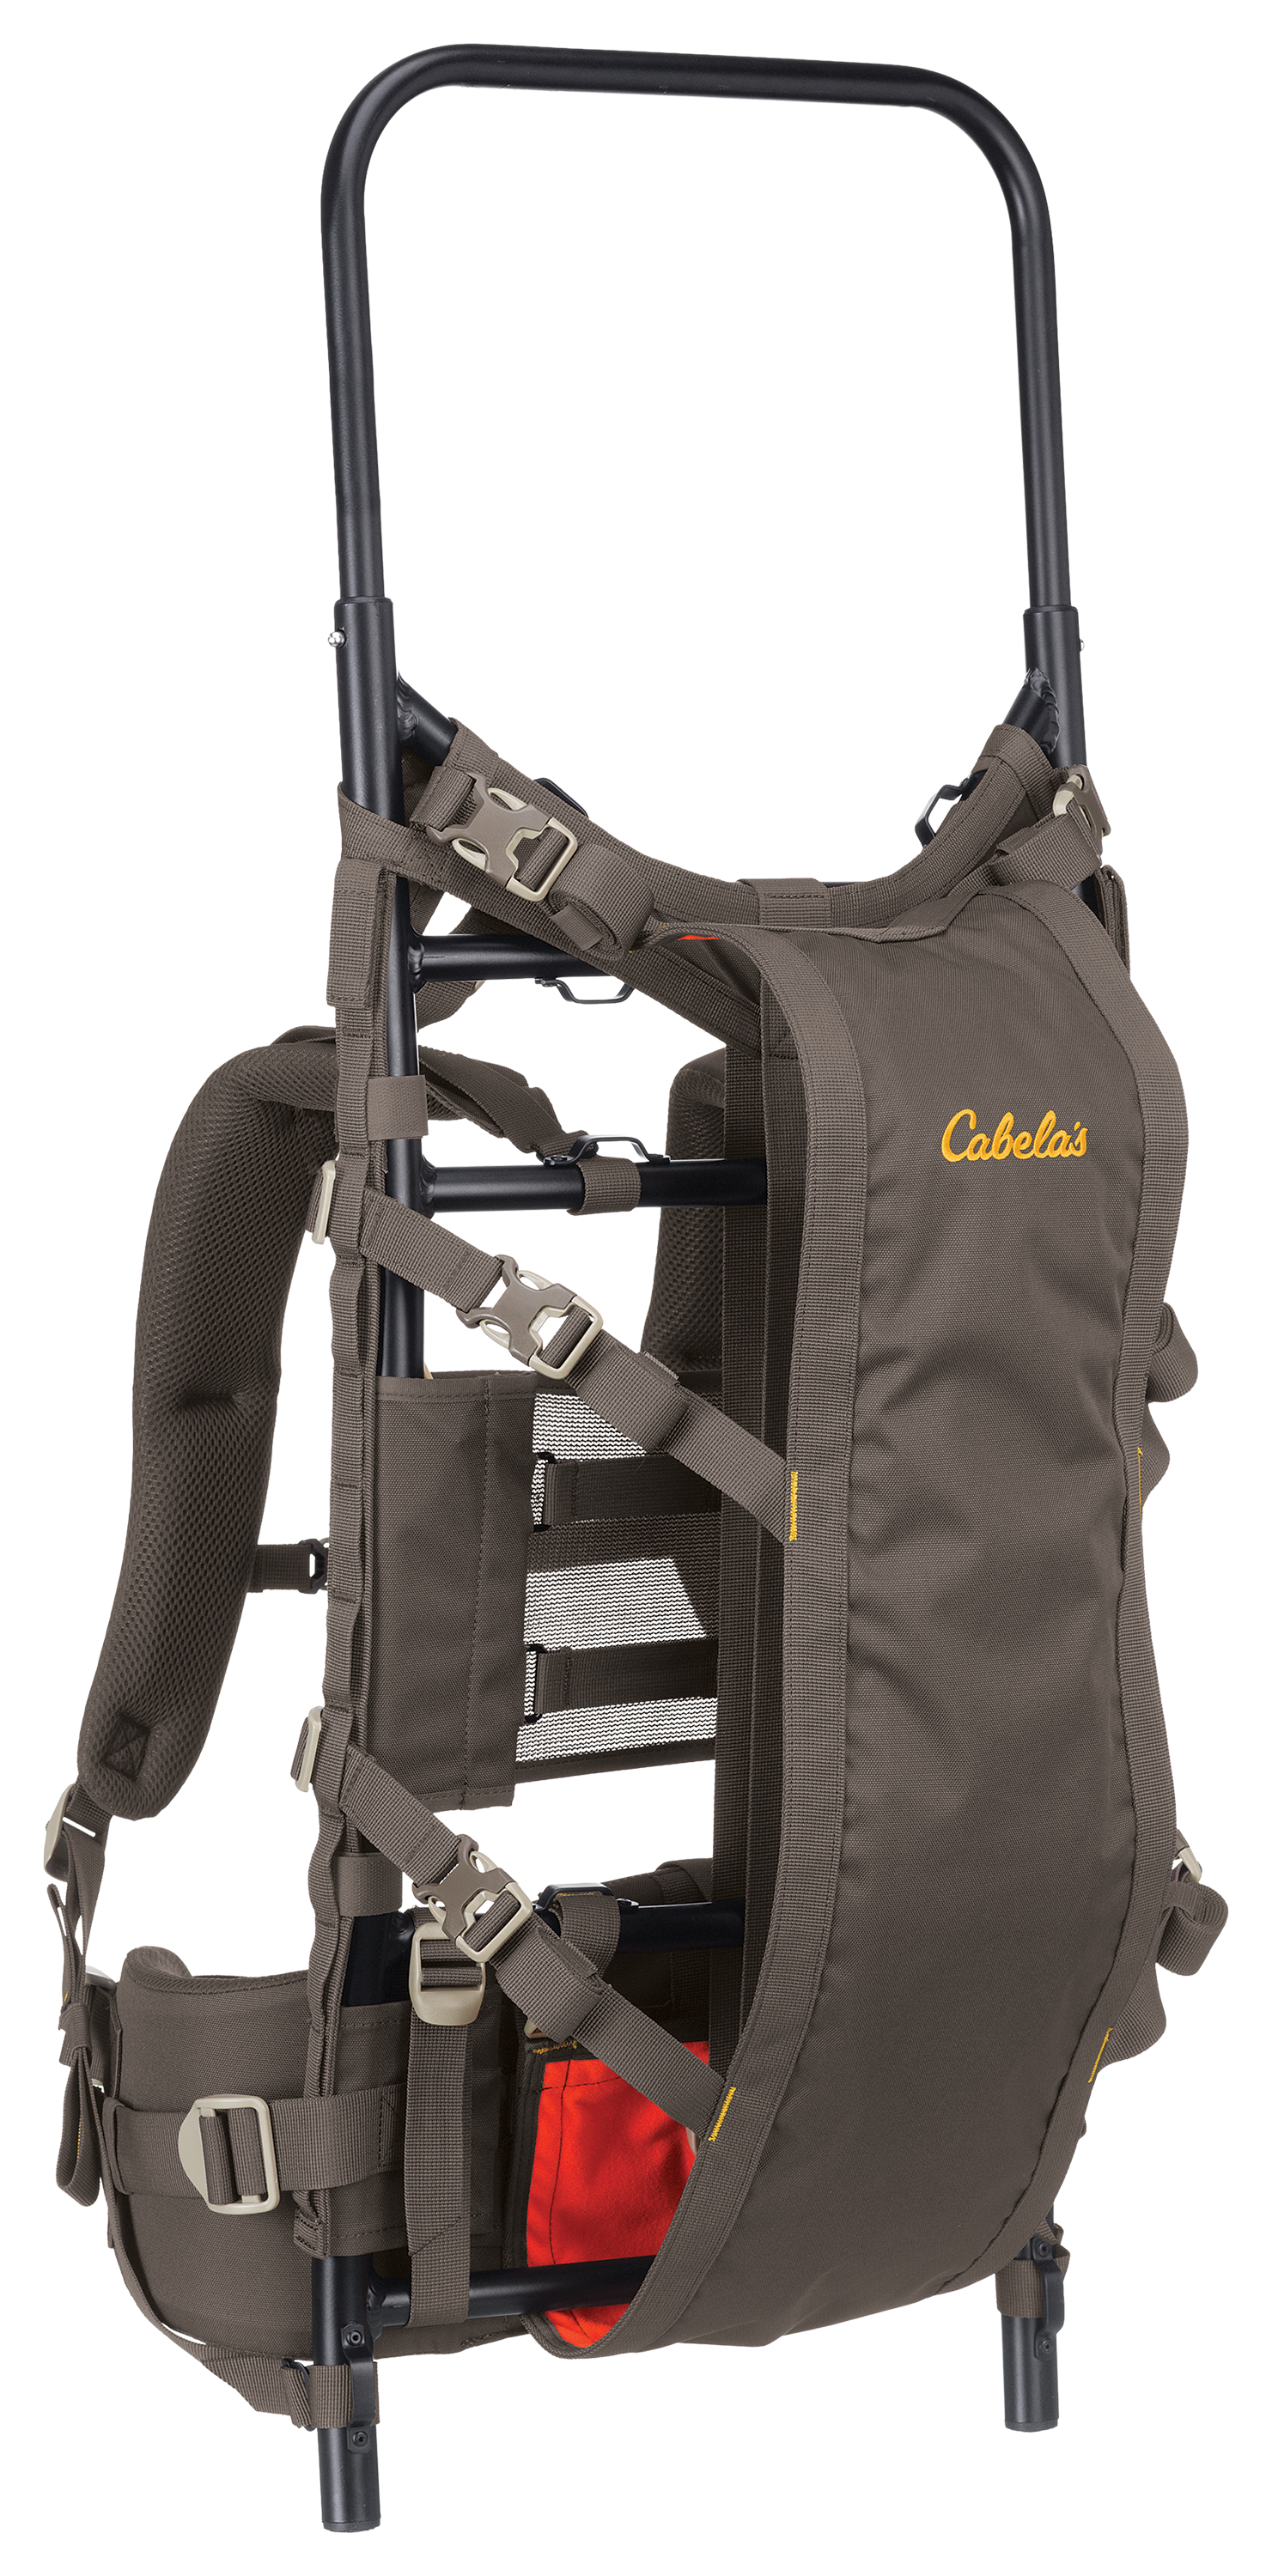 Cabela's Ice Fishing Clearance Sale: Up to 25% off + 10% off $50 for